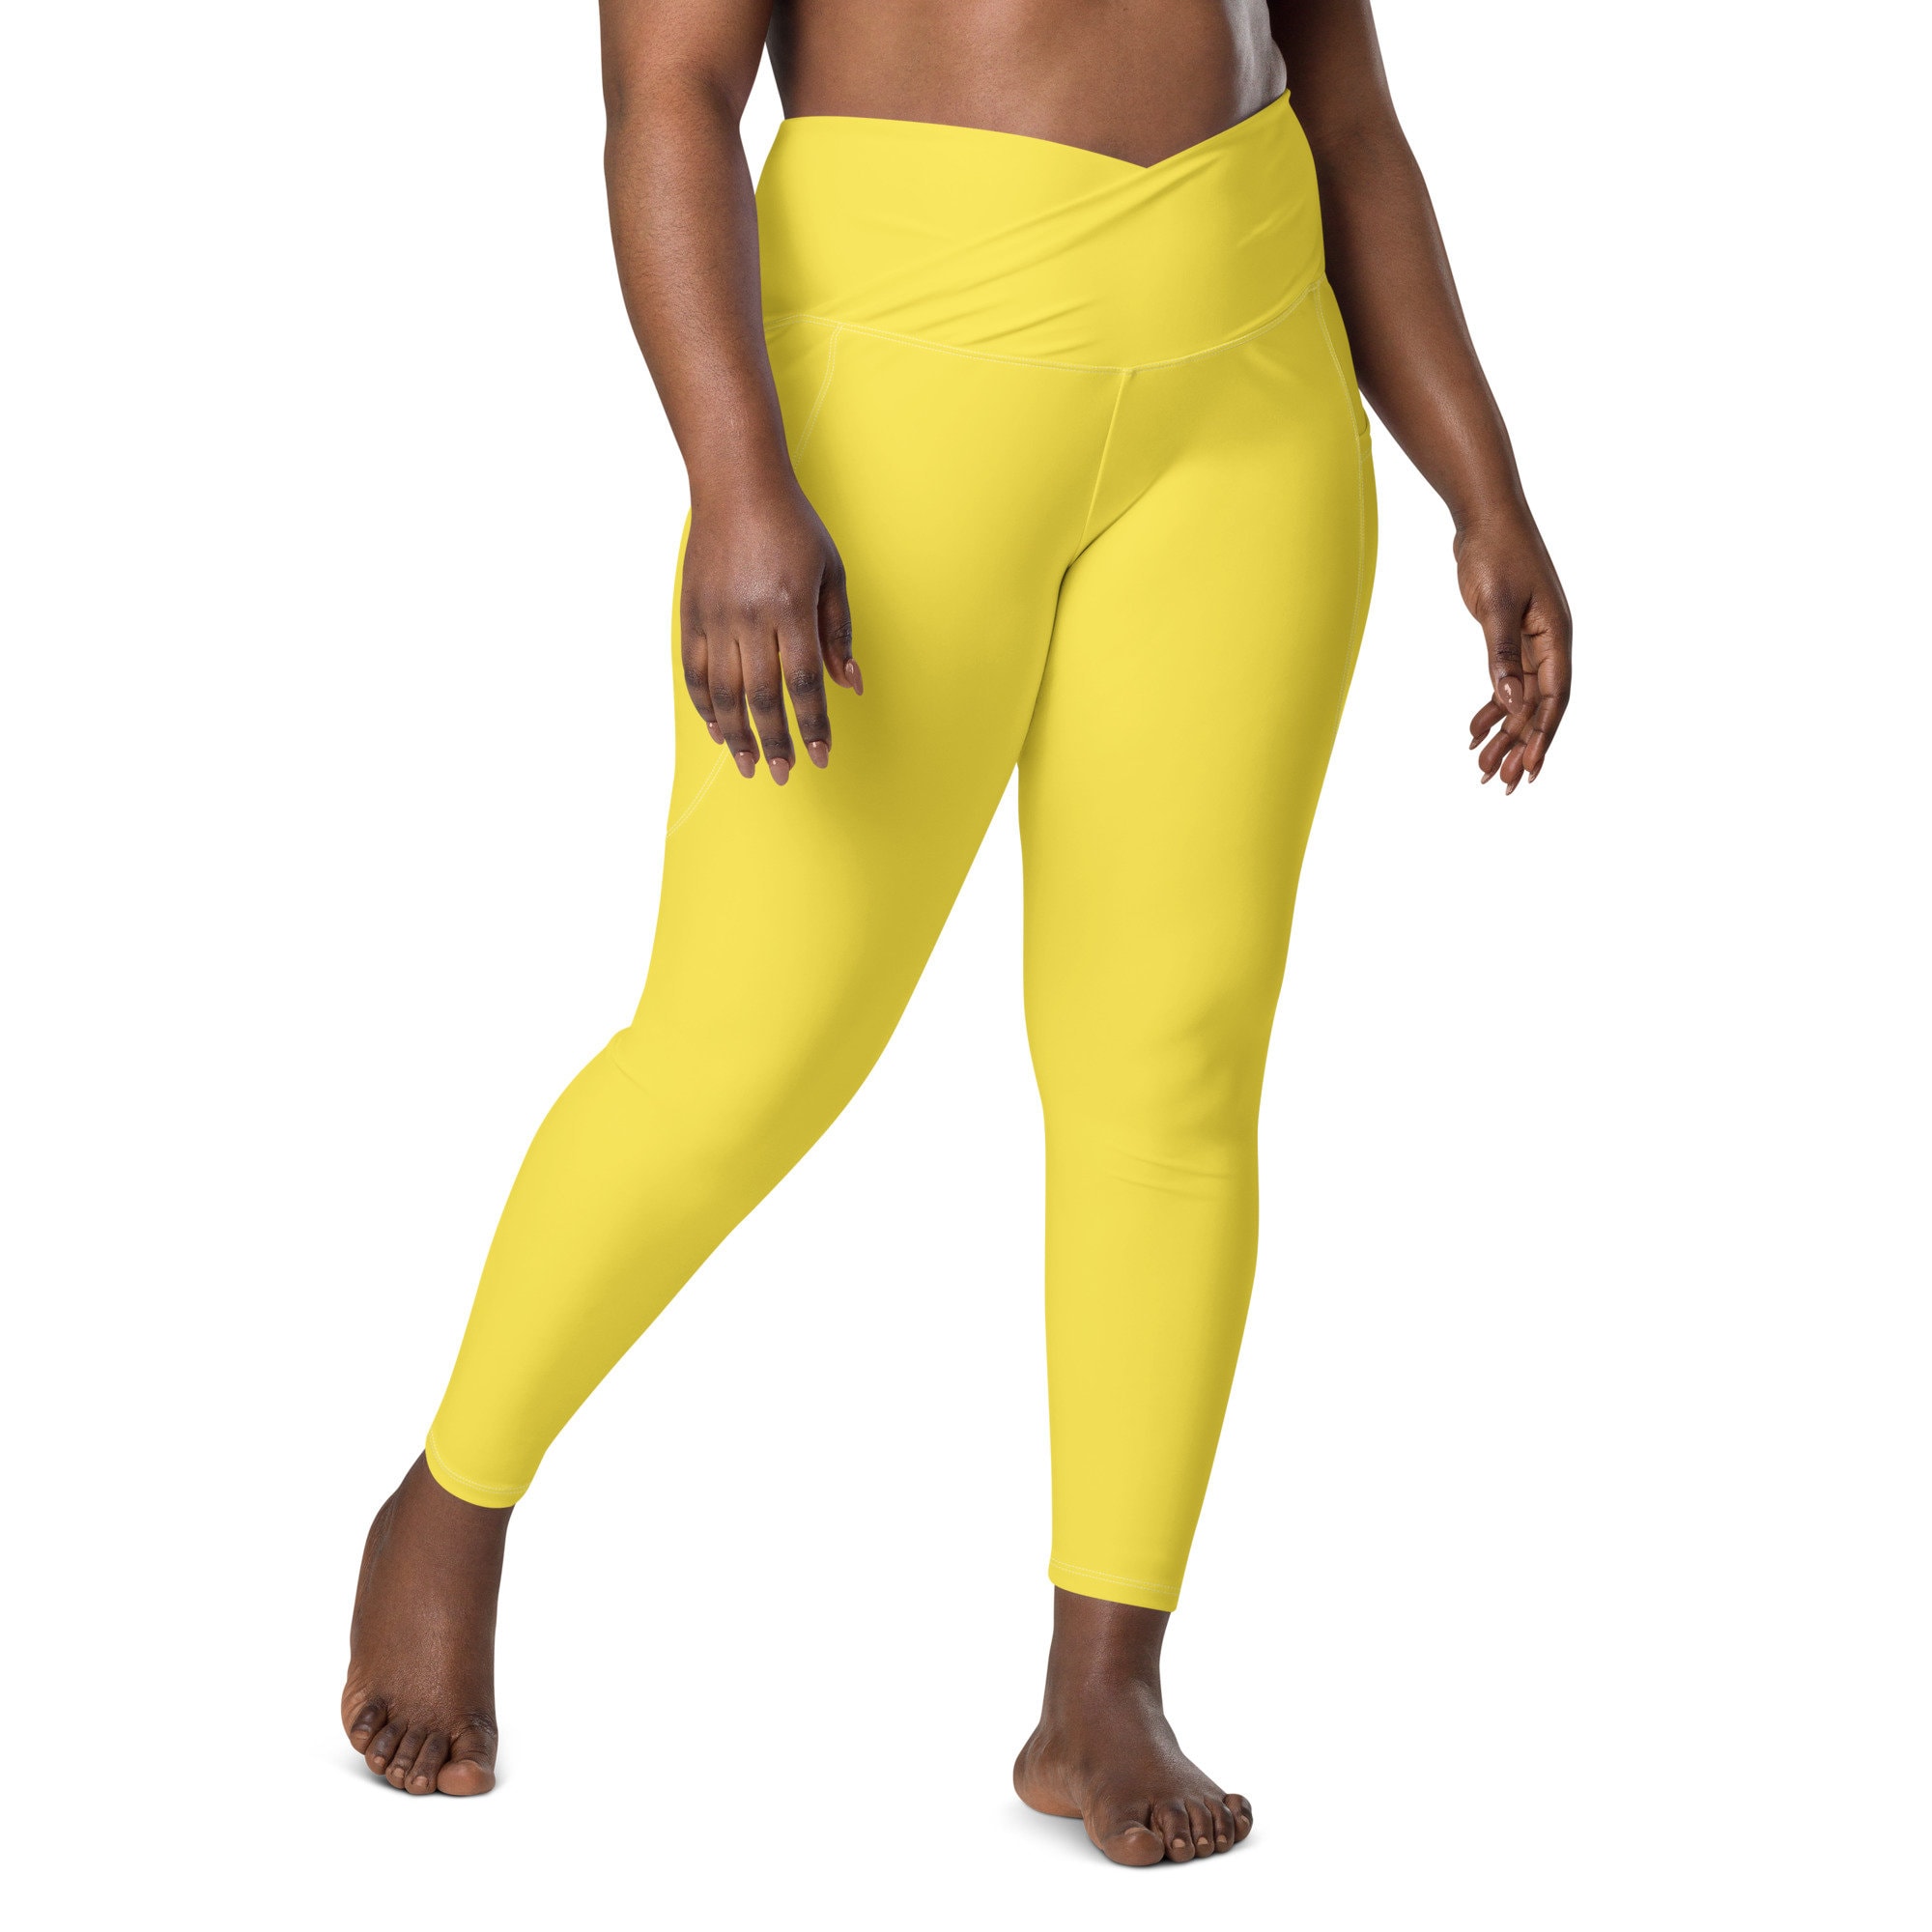 Exceptionally Stylish Yellow Leggings at Low Prices 